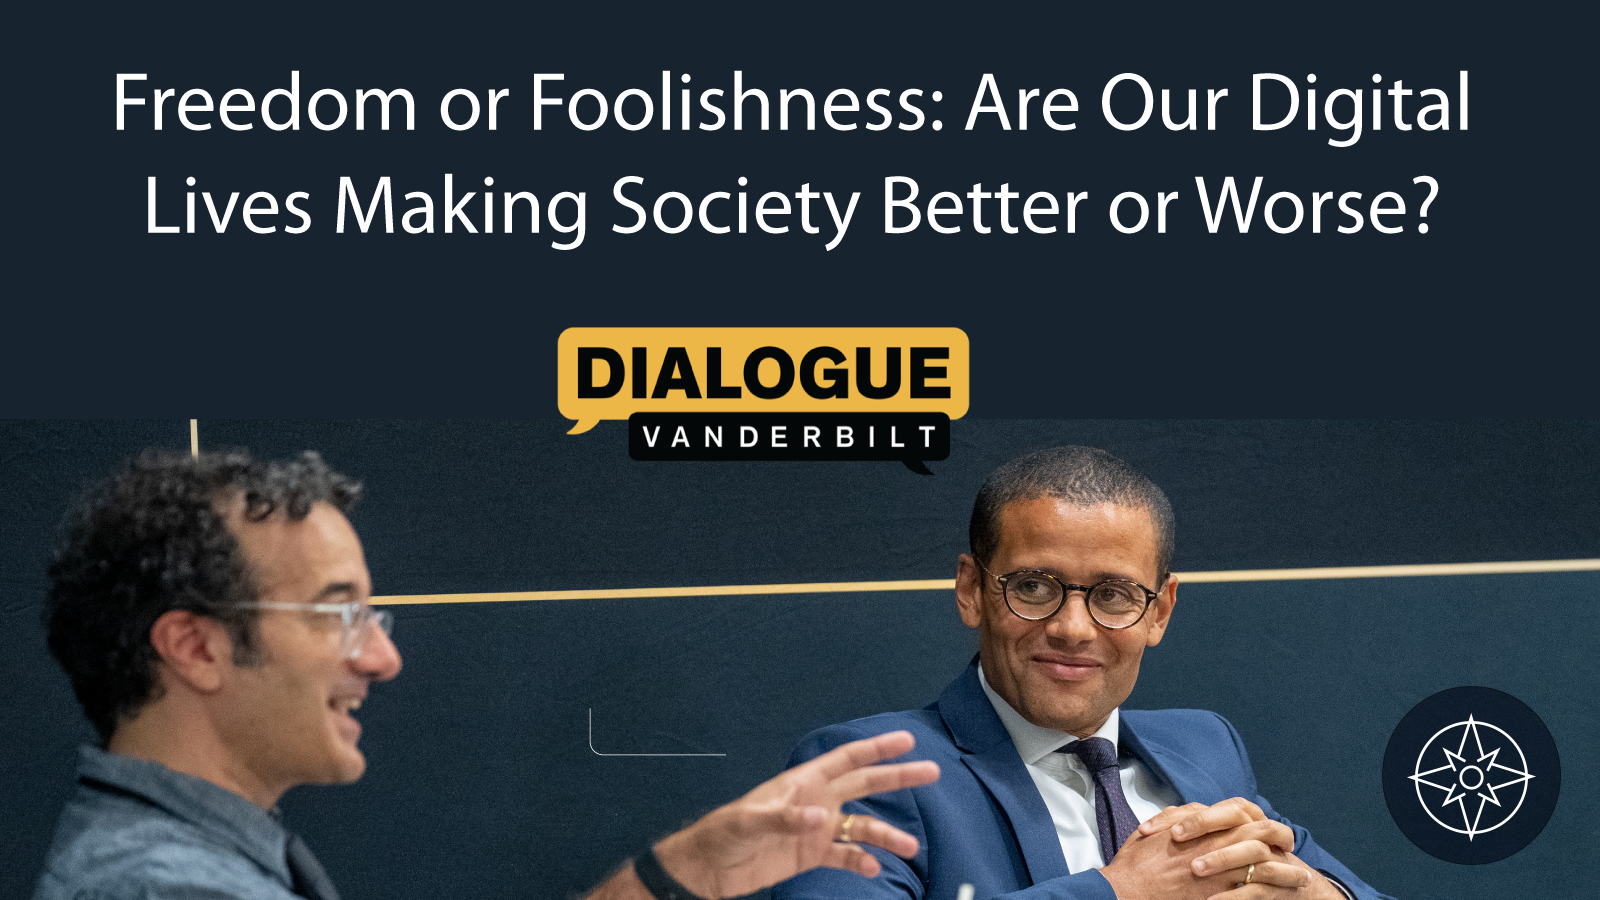 Heard Libraries and Wild Bunch to co-host Dialogue Vanderbilt discussion featuring Jad Abumrad and Jacob Mchangama on Nov. 2